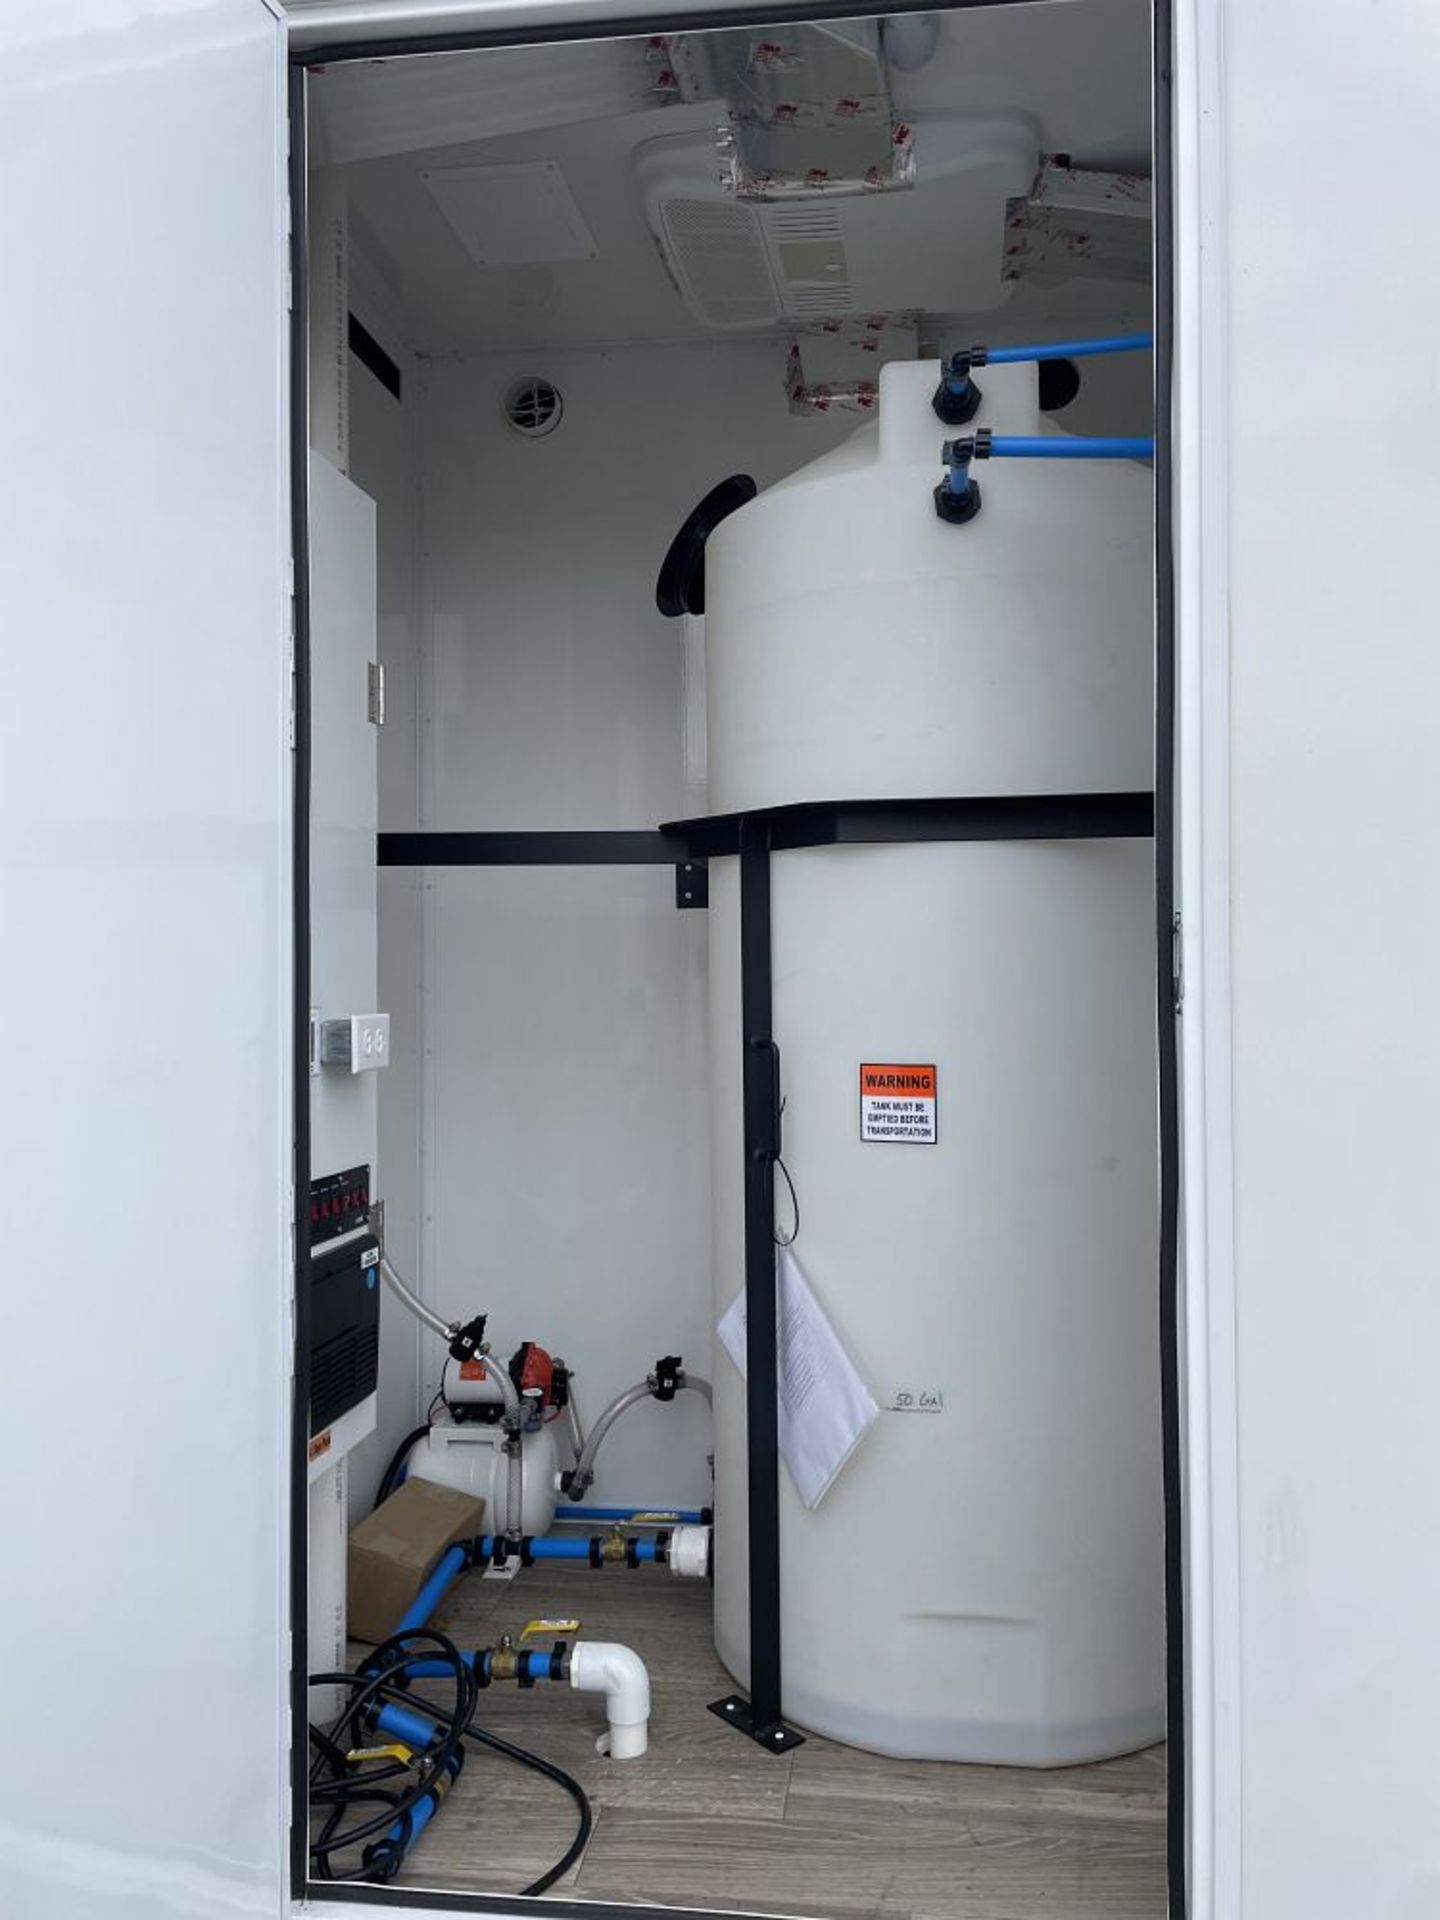 2022 LANG SPECIALTY RESTROOM TRAILER, 5 STALL - Image 18 of 18